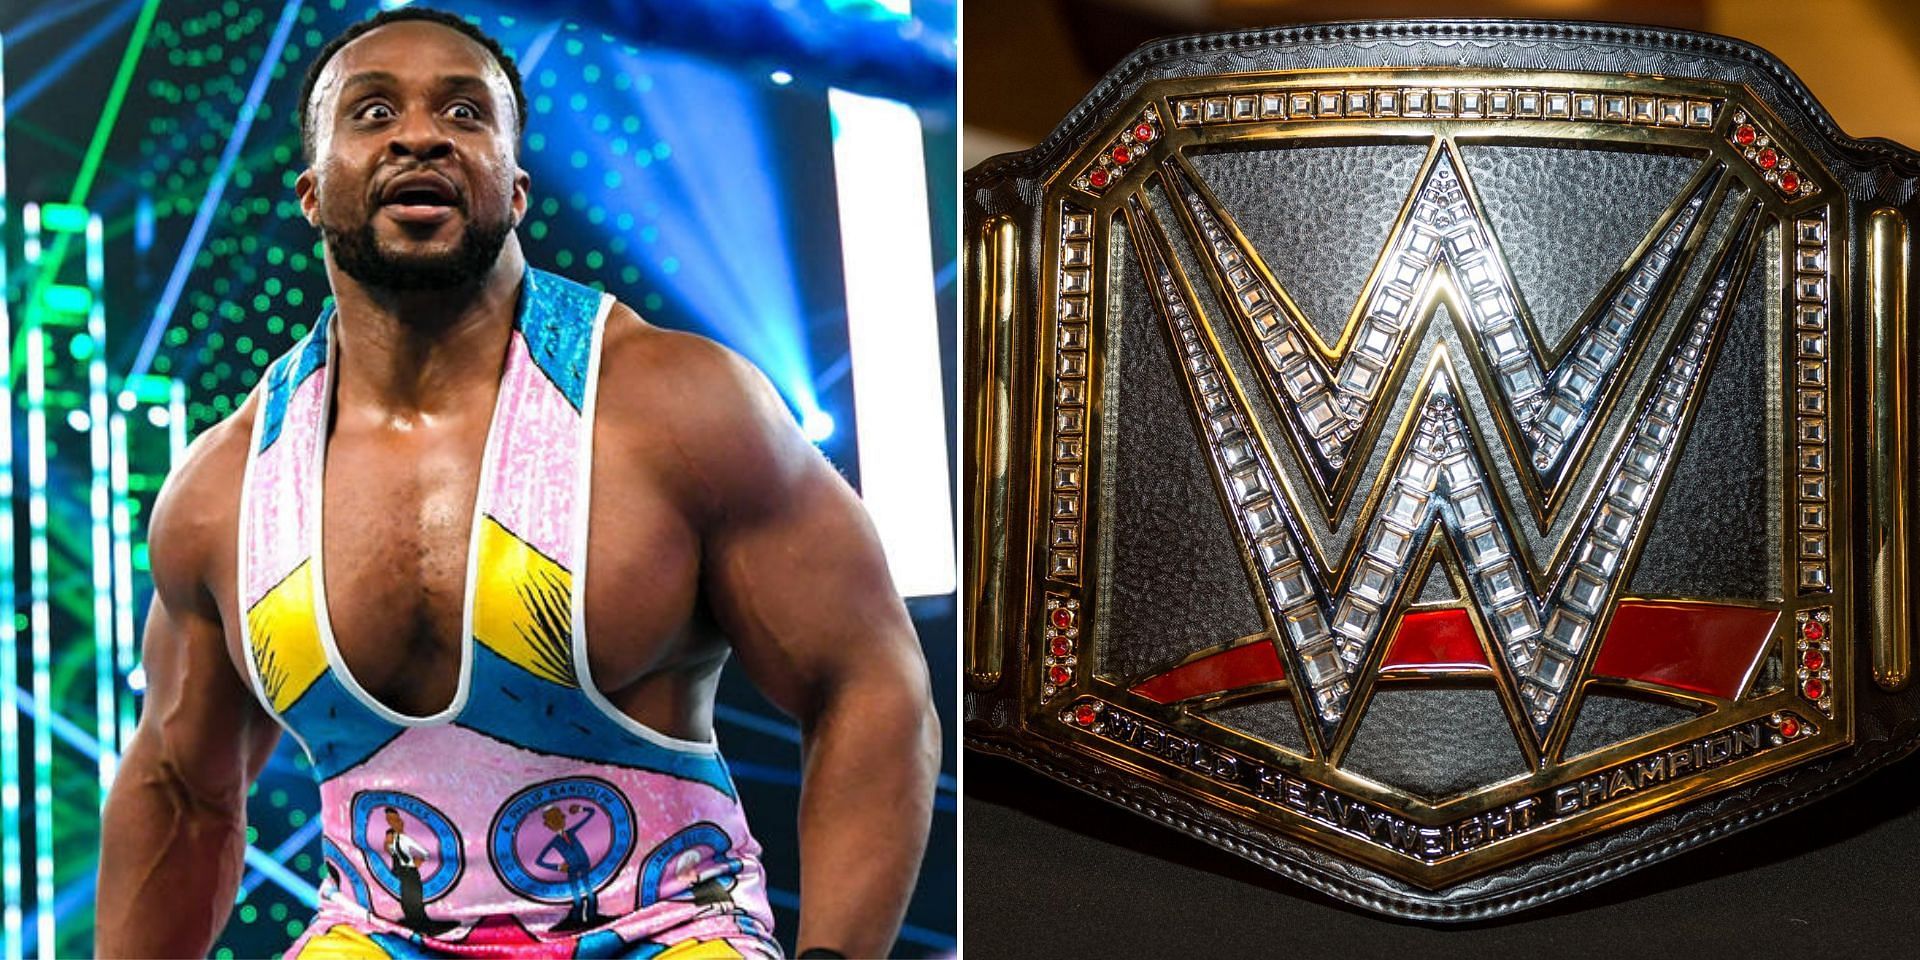 Big E wants this superstar to win the big one